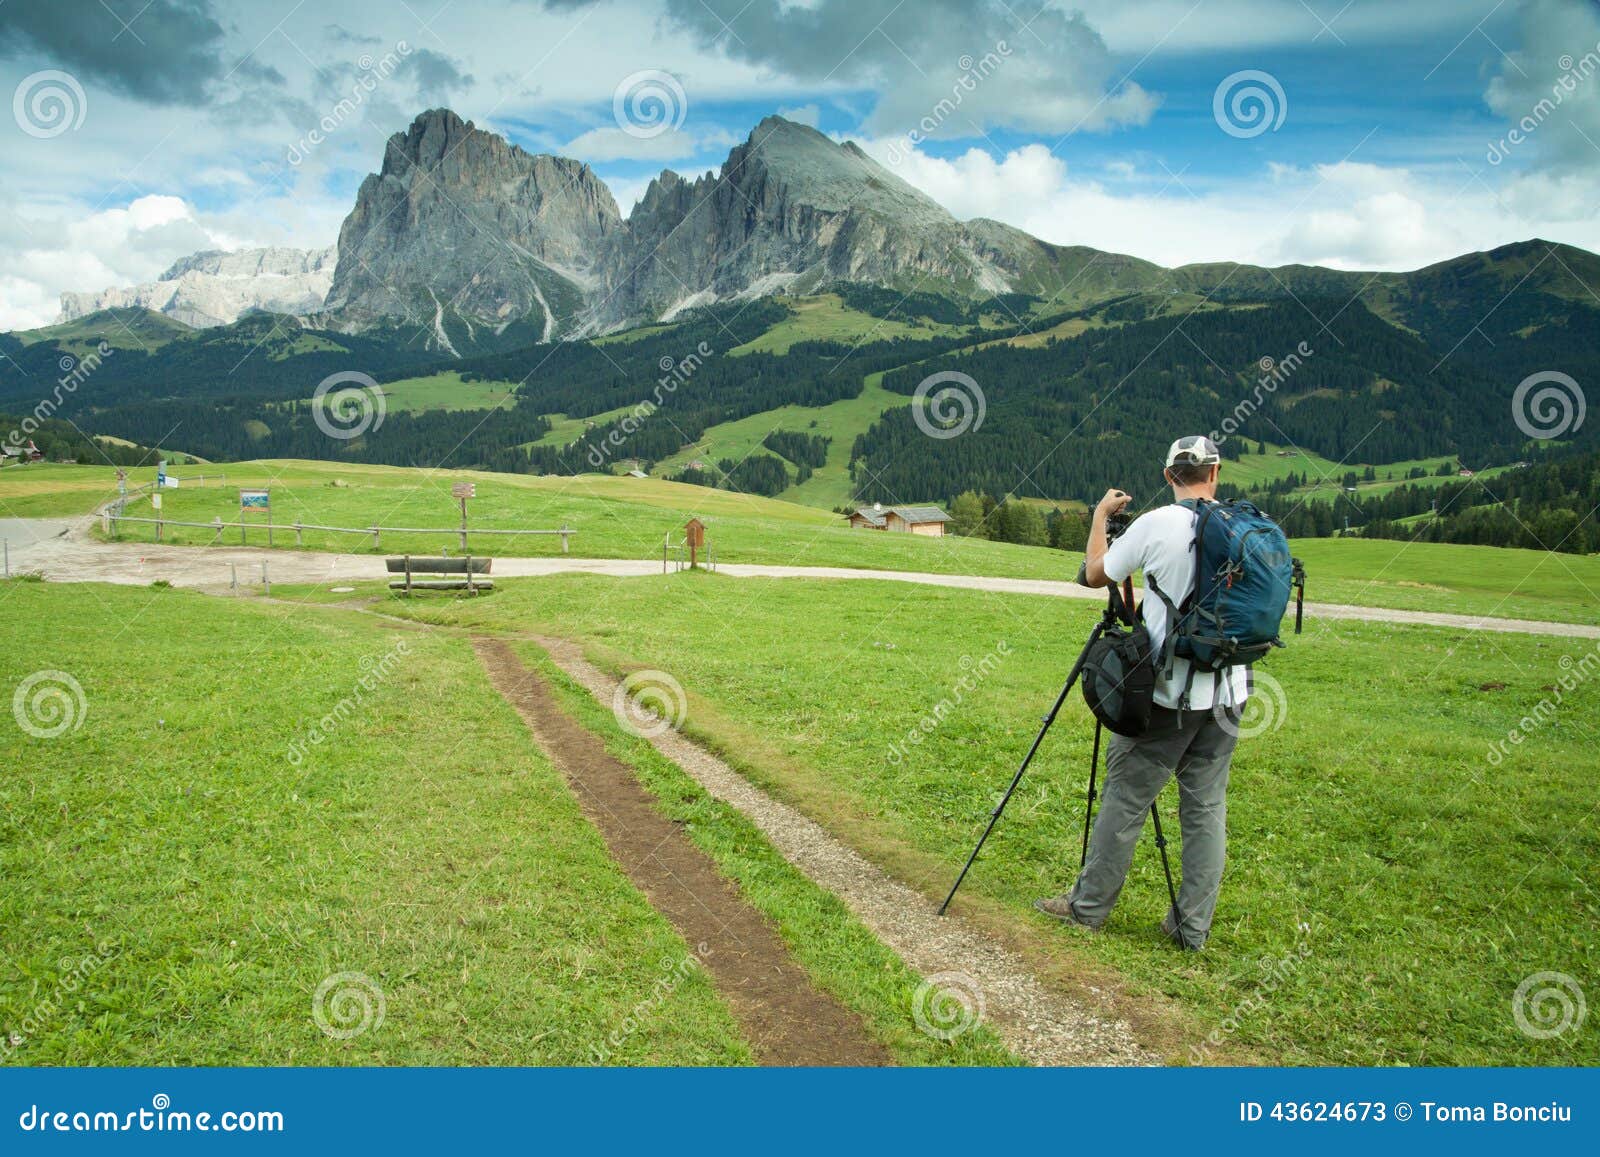 Stock Photo: Nature and landscape photographer in Dolomite